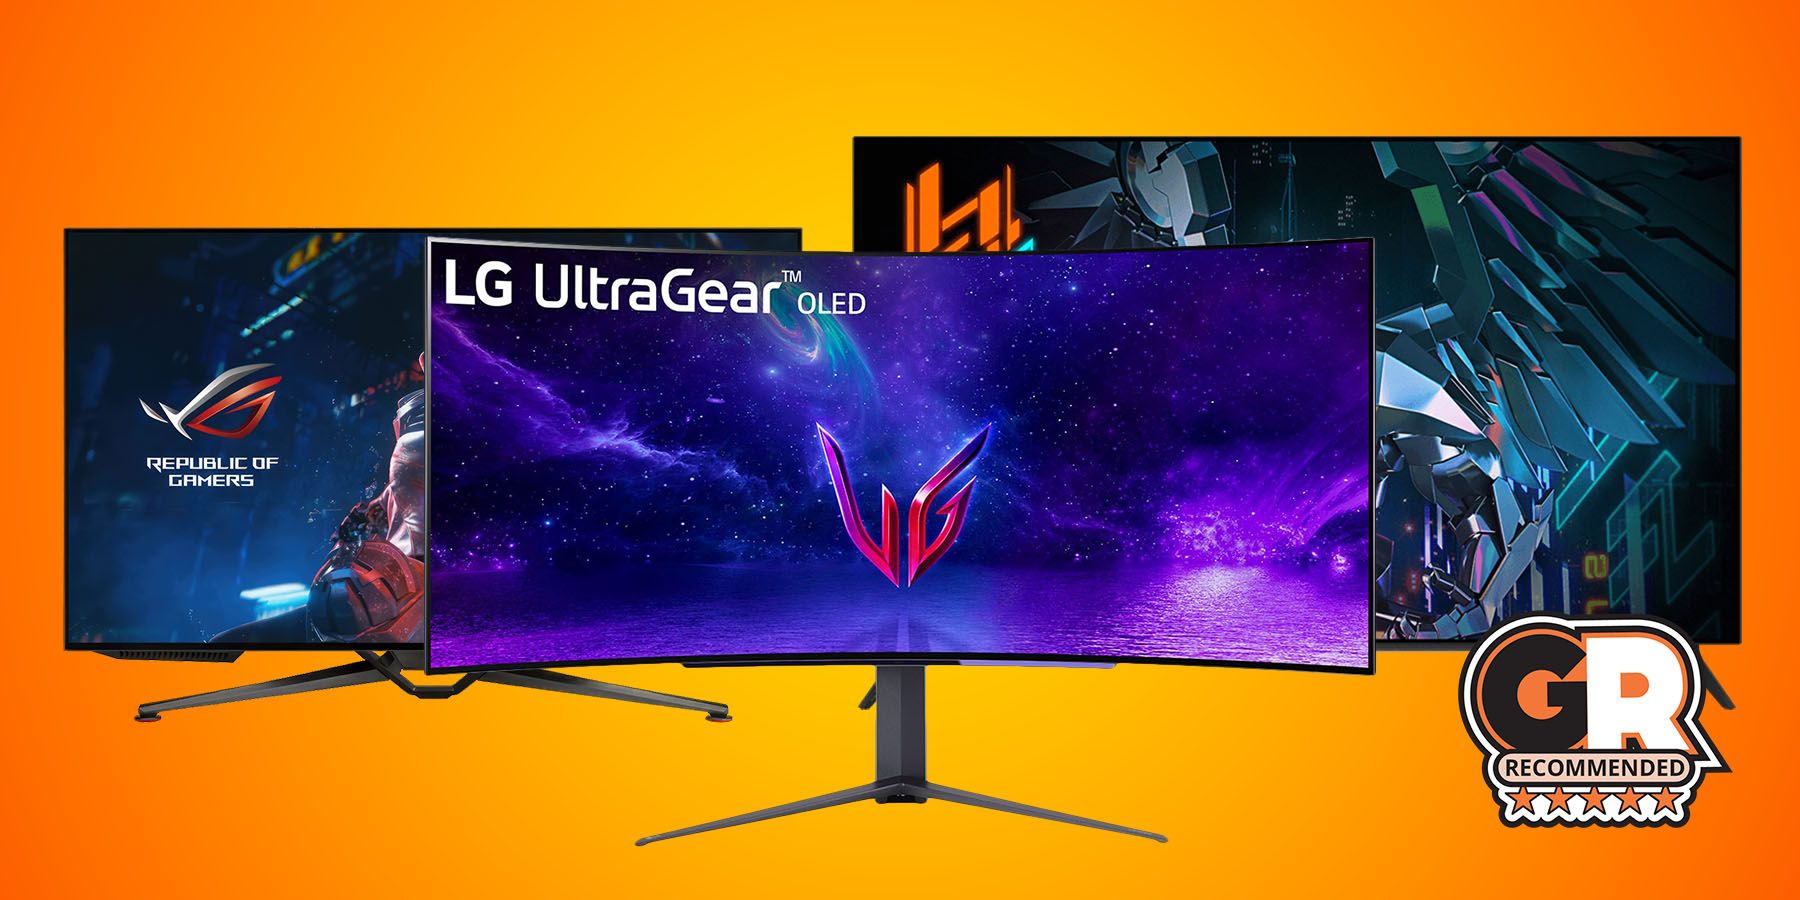 LG's new 4K OLED monitor allows you to switch between 4K/120Hz and